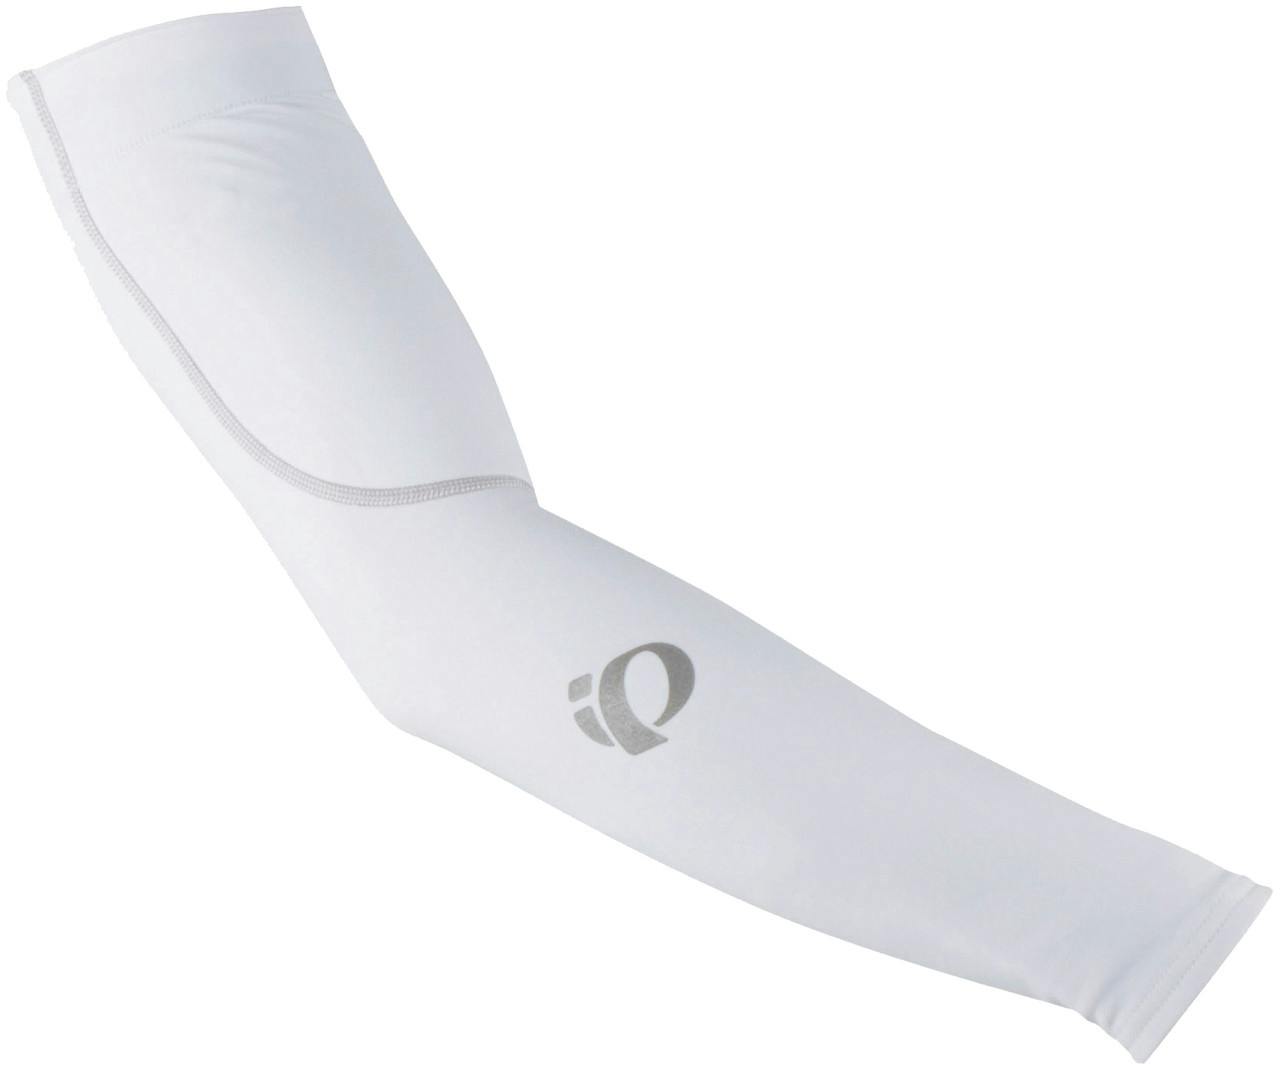 Thermal Arm Warmers White